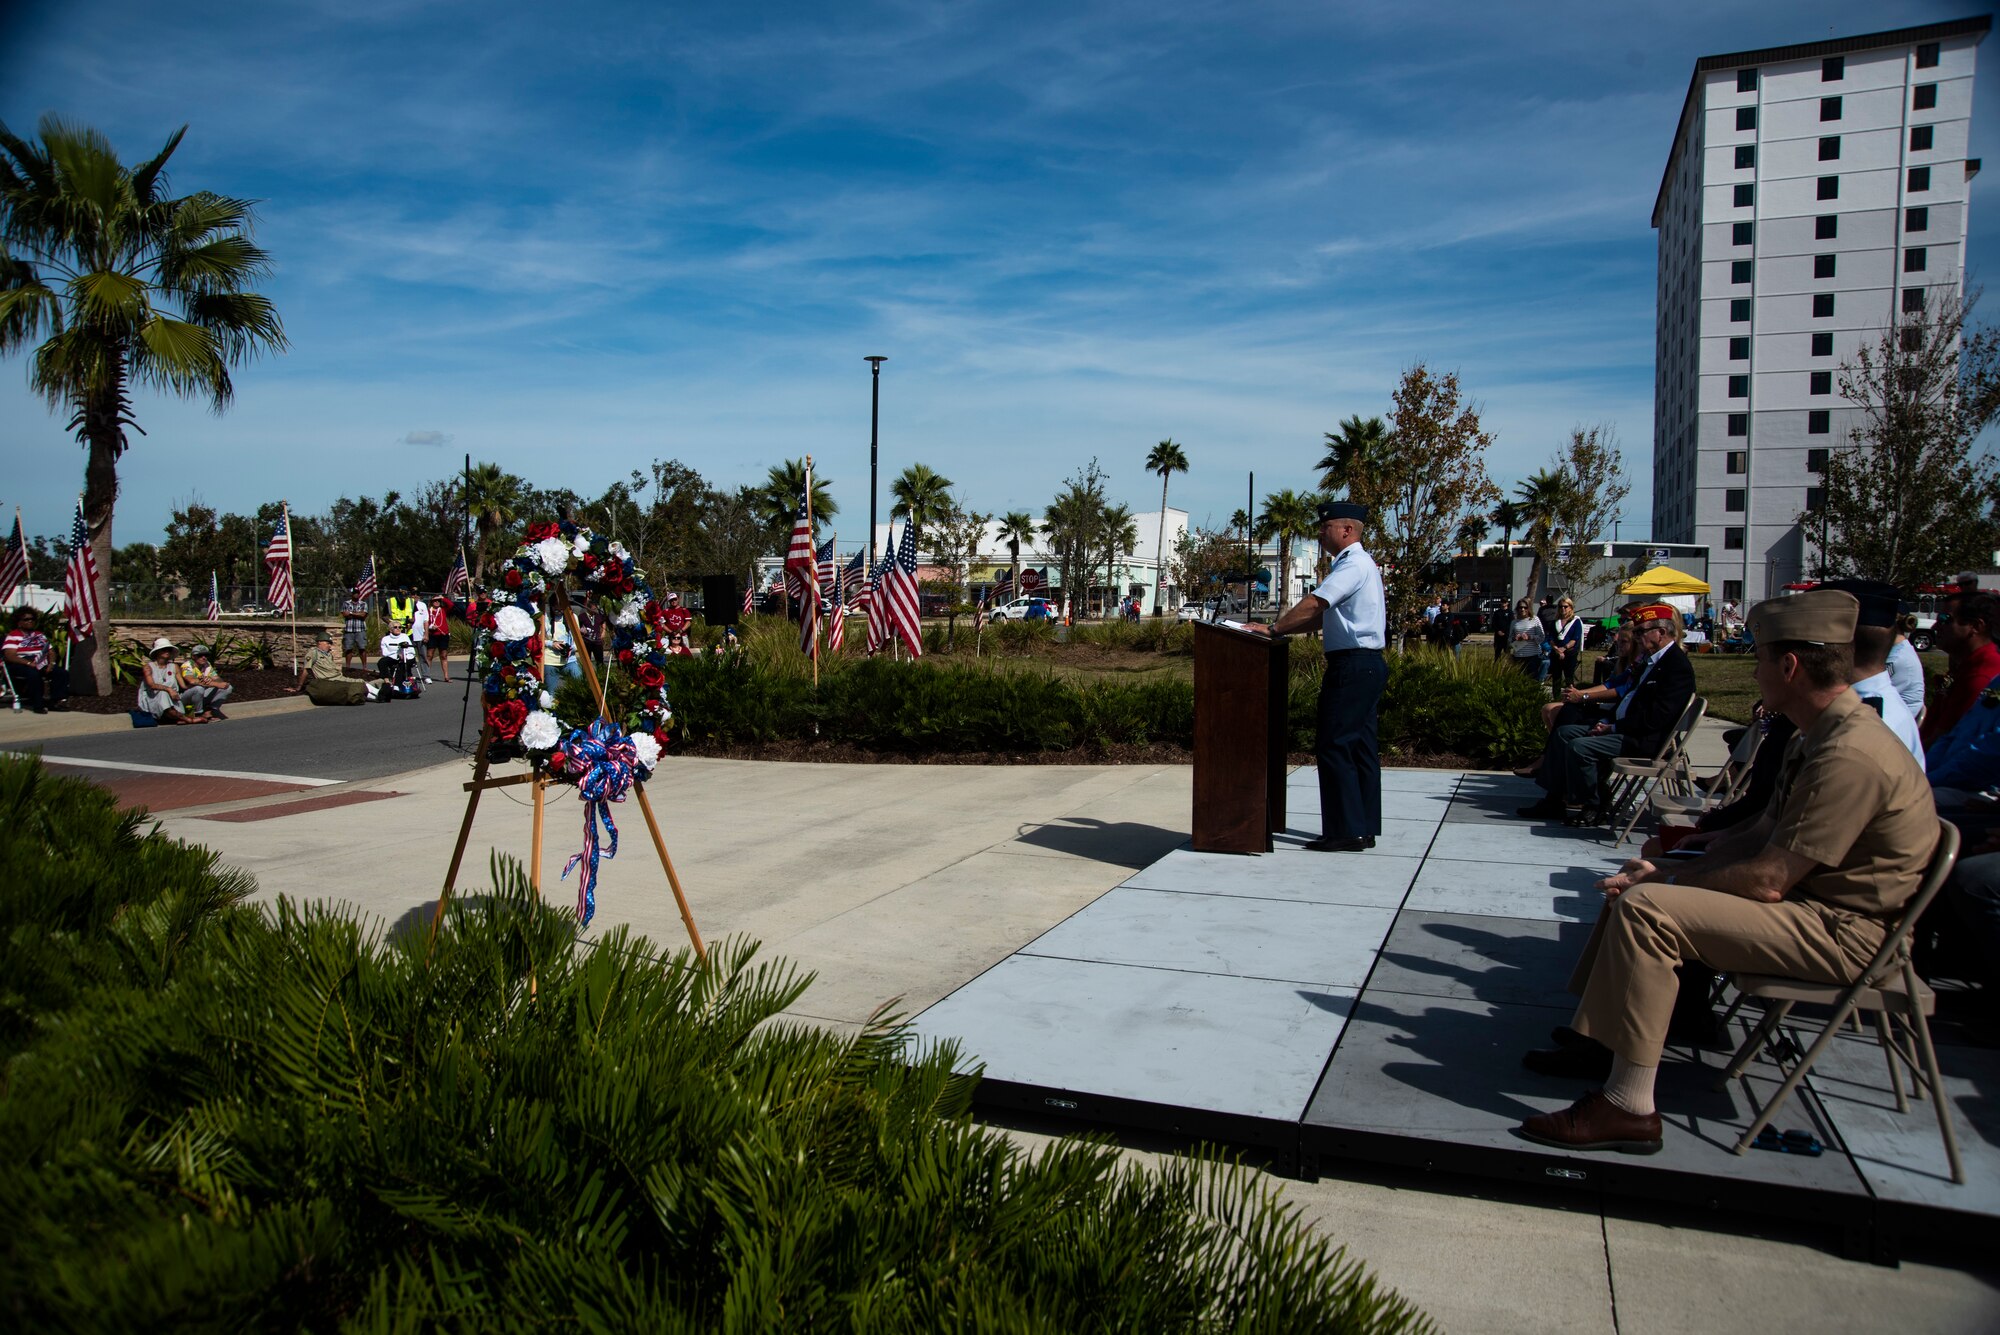 Col. Brian Laidlaw, 325th Fighter Wing commander, delivers a speech at the annual Veterans Day parade celebration and wreath laying ceremony on Nov. 11, 2019, at Panama City, Florida. The annual event celebrated those who served in the past and to honor the sacrifices made by the service member, as well as their families, both at home and abroad. Laidlaw thanked many local community members who served in prior conflicts and also thanked Bay County for supporting their veterans. (U.S. Air Force photo by Staff Sgt. Magen M. Reeves)